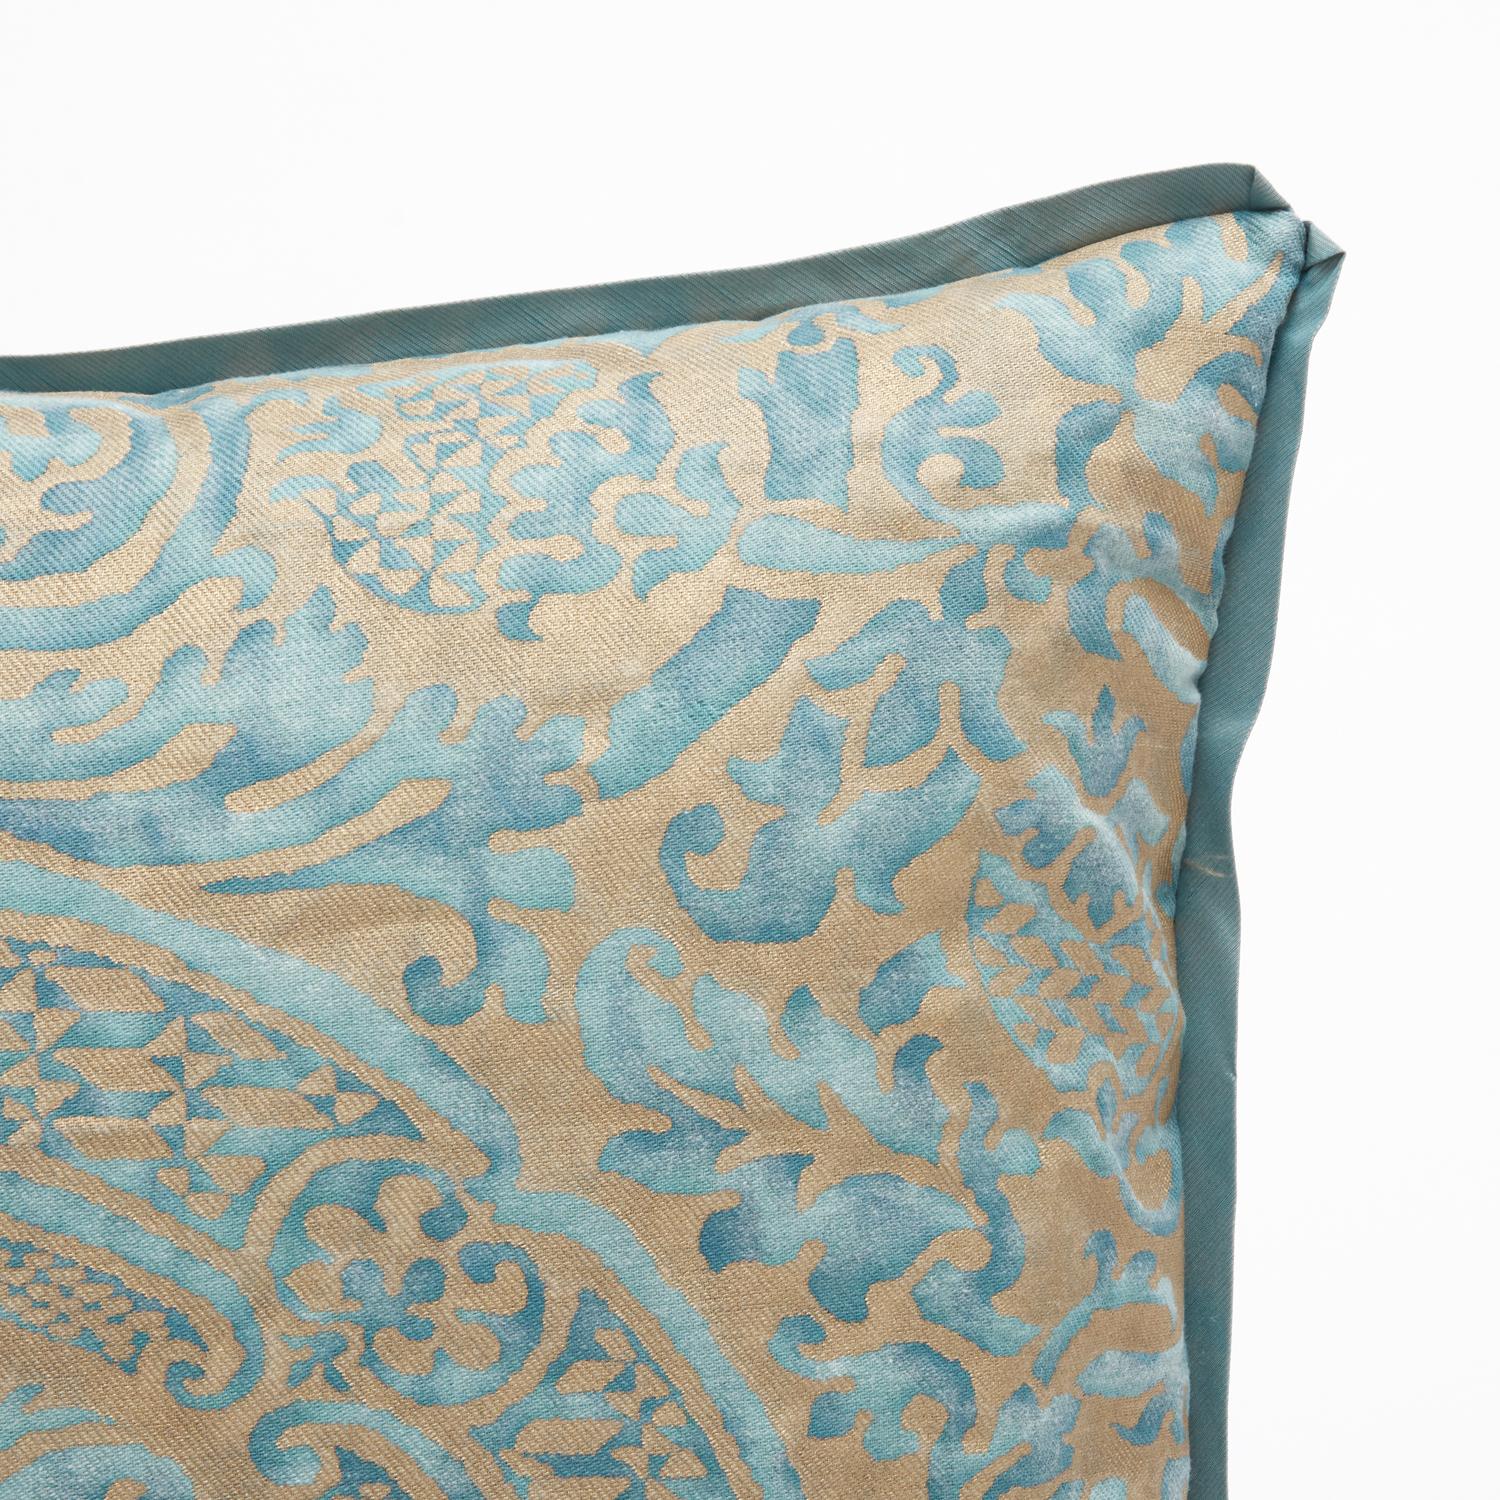 A Fortuny fabric cushions in the Orsini pattern. Featuring a gorgeous gold and blue colorway, the Orsini pattern is a 17th century Italian design named for one of the most princely families in medieval Italy and Renaissance Rome, the Orsini. With